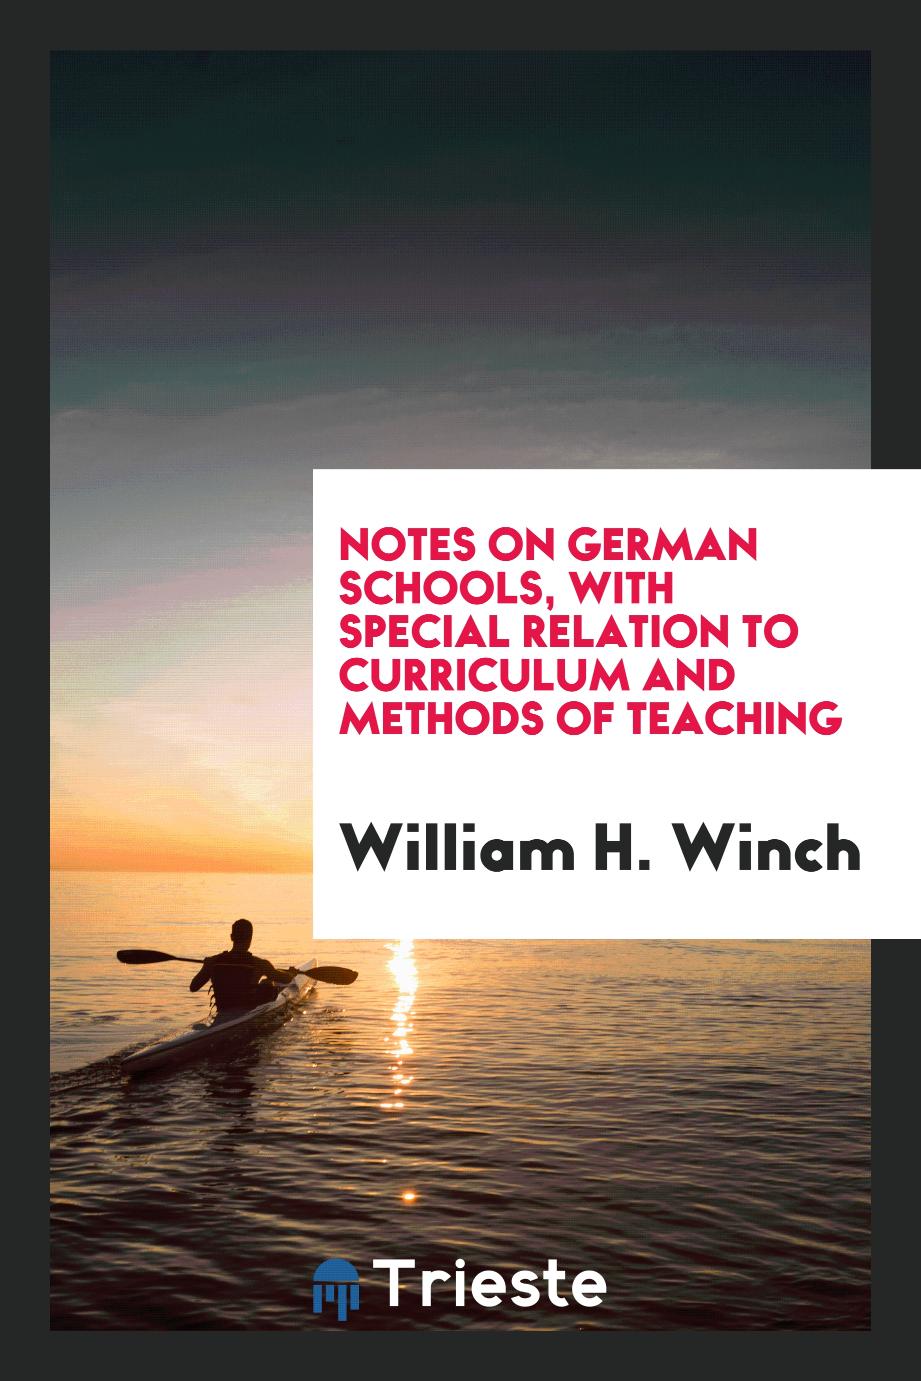 Notes on German schools, with special relation to curriculum and methods of teaching